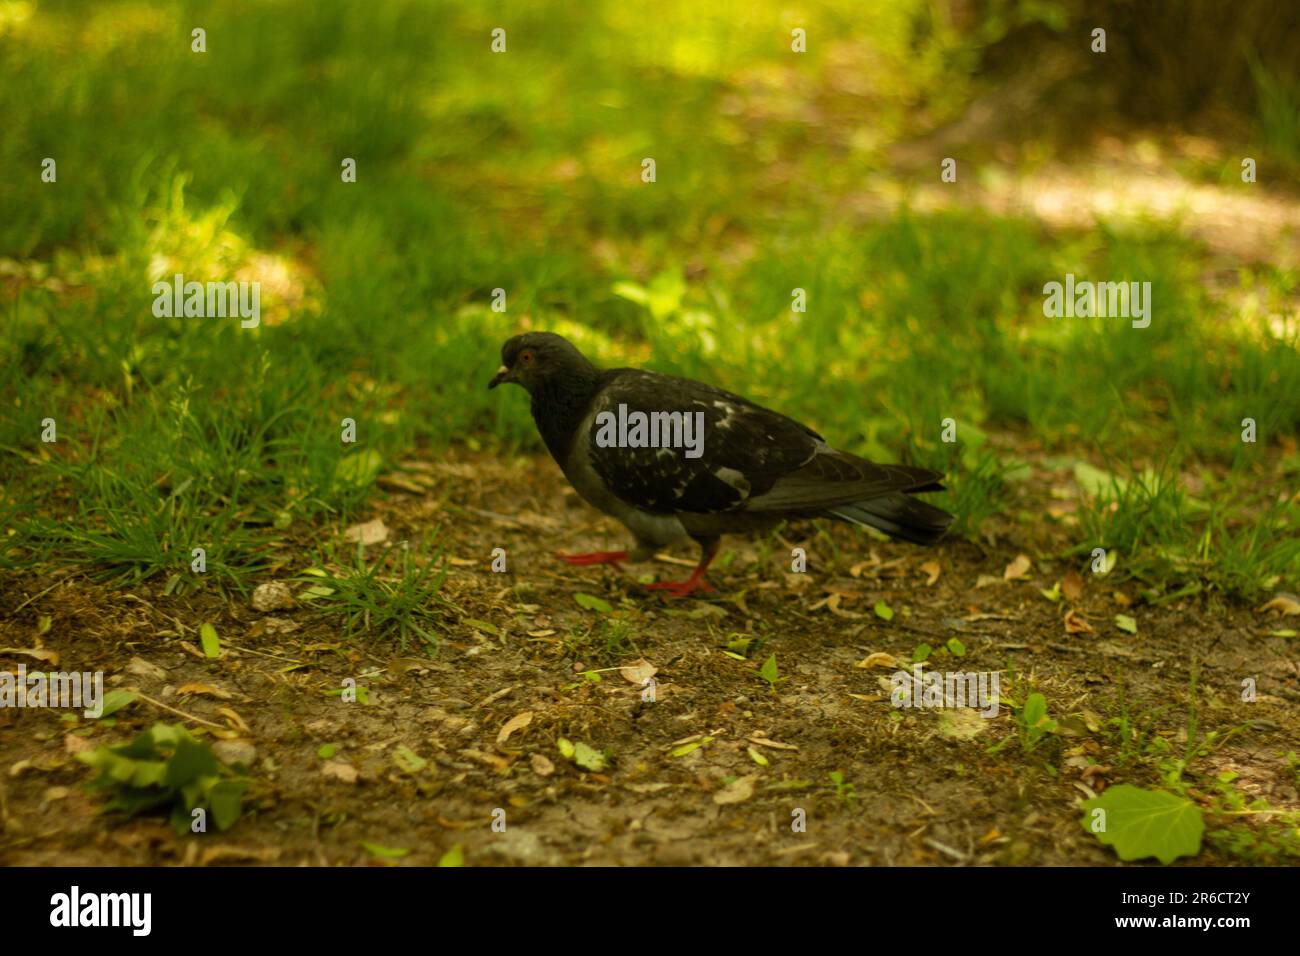 View of wild common wood pigeon bird with  gray body roaming on grassy ground in park Stock Photo